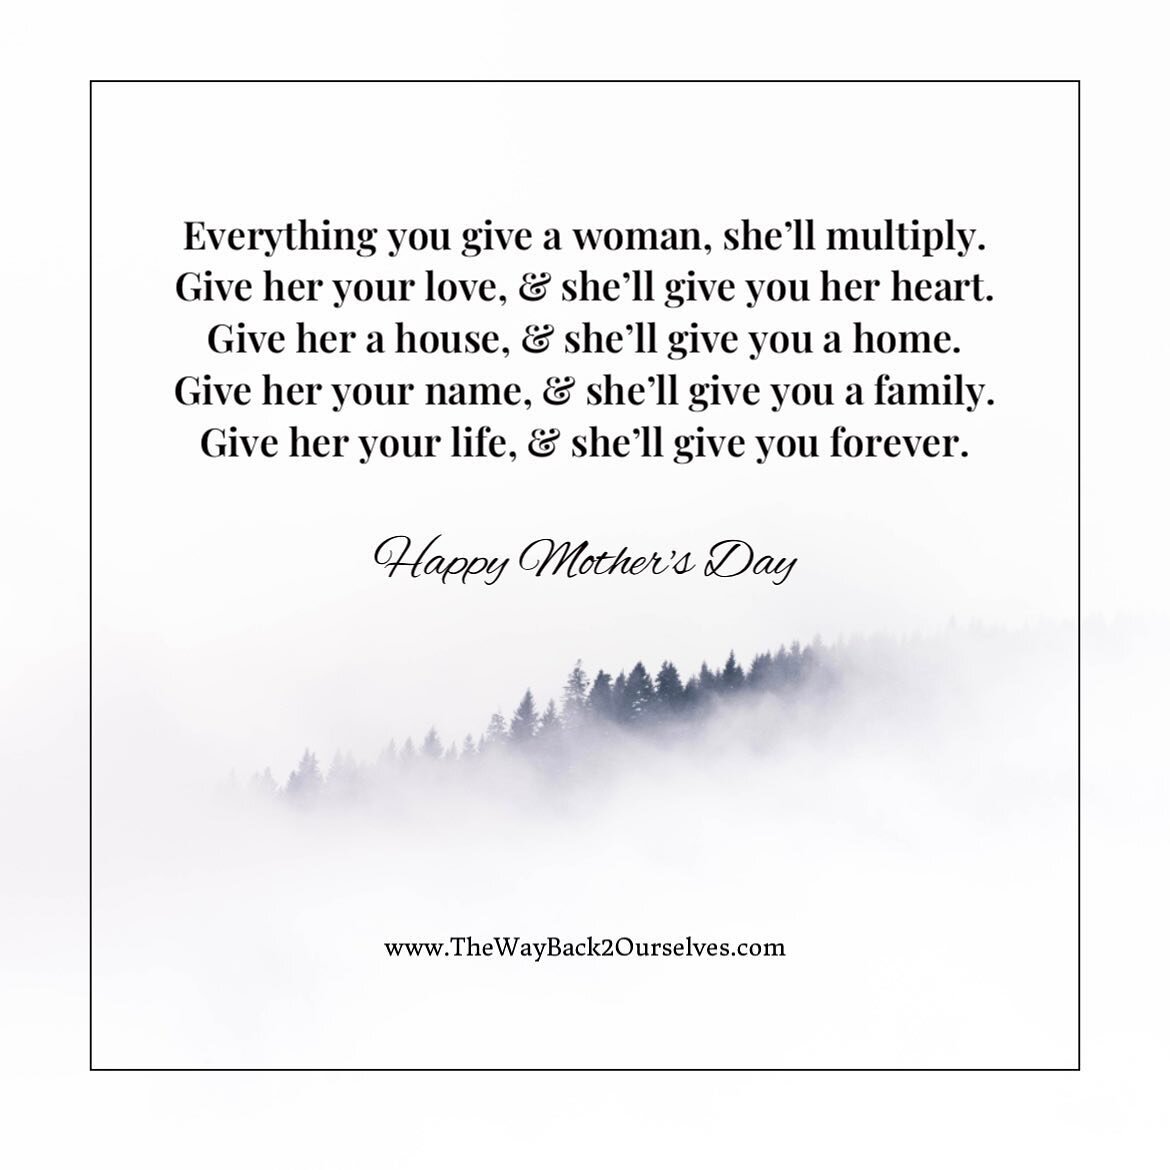 💕It&rsquo;s one of the most beautiful and complex days of the year: Mother&rsquo;s Day. 💕

Whether you are a mom, mourning the loss of your mom, or the loss of your fertility or dreams, know you are HELD in every moment. 

You are beautiful.
You ar